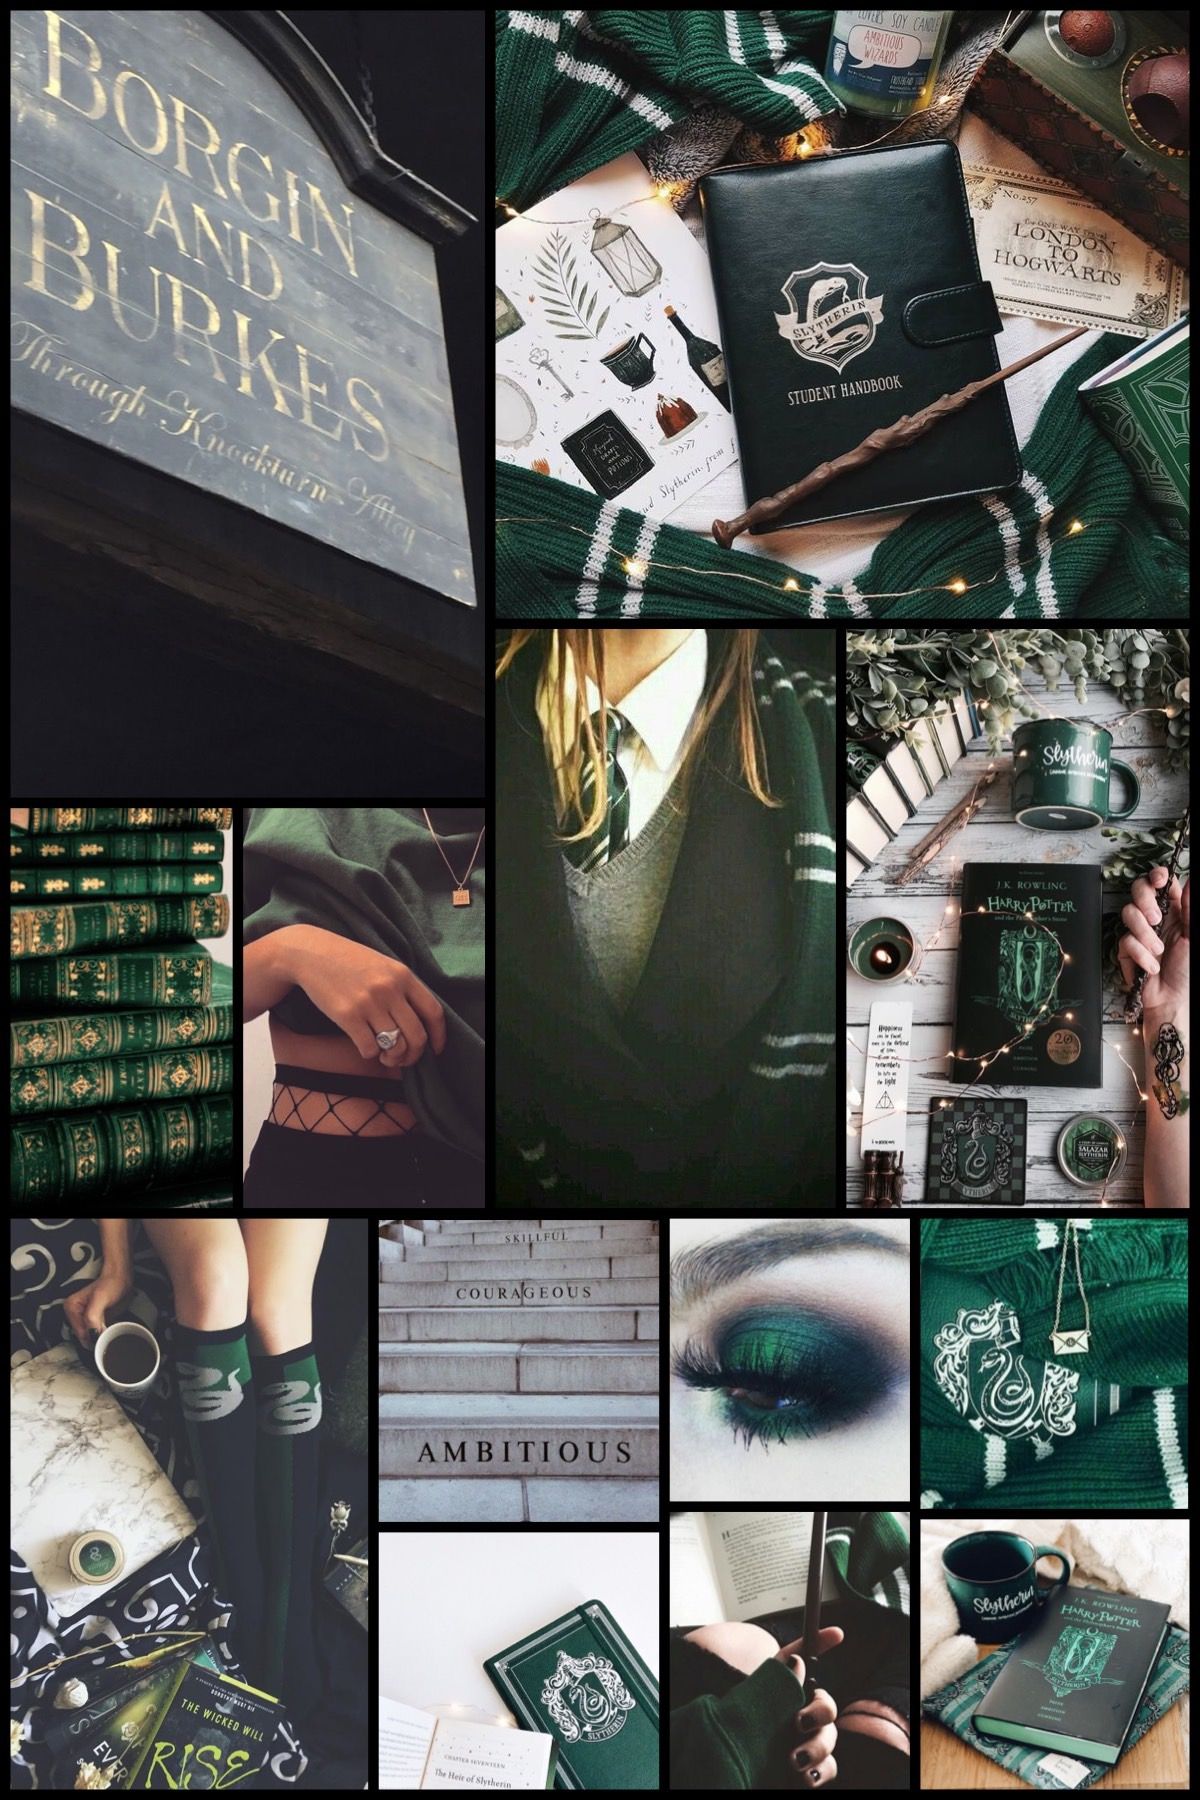 A collage of photos of the Harry Potter series, specifically the house of Slytherin. - Slytherin